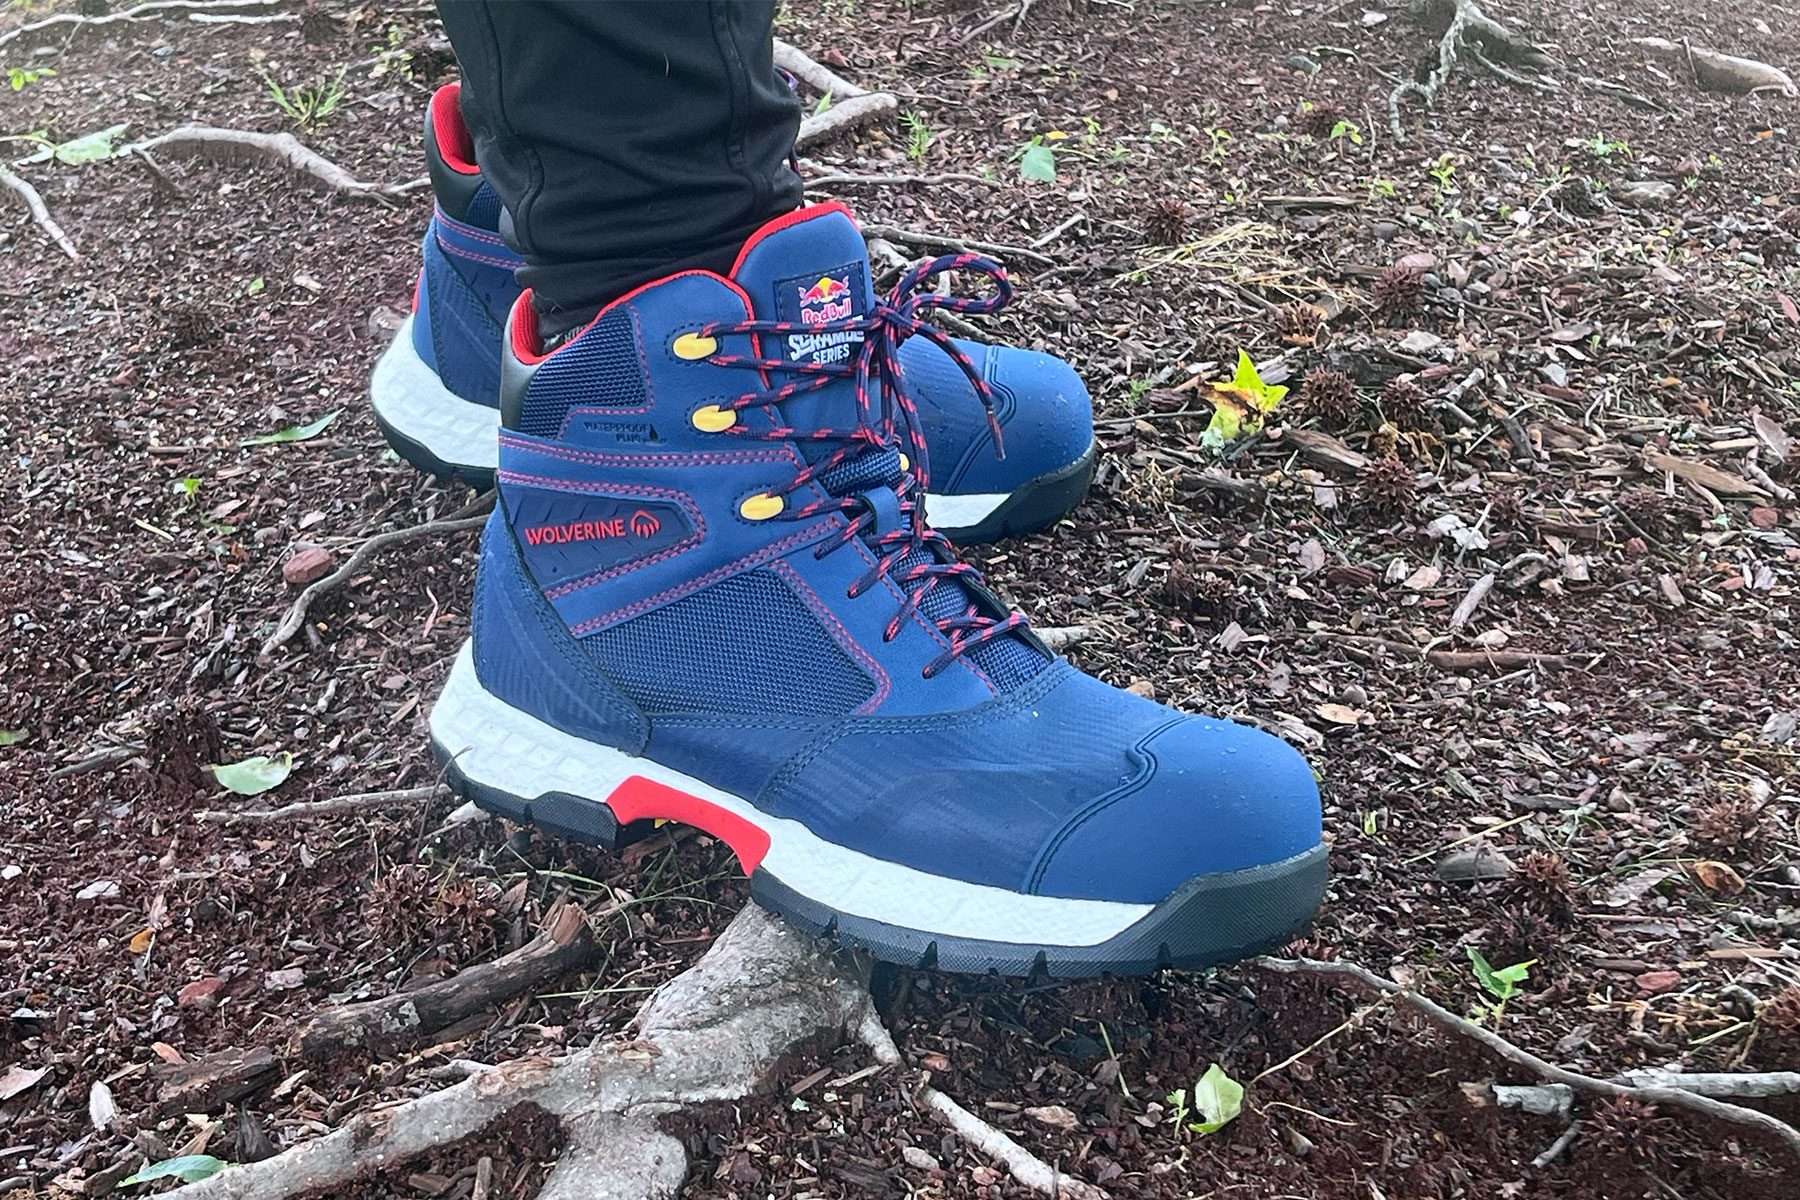 Wolverine Hiking Boots Get A Red Bull Themed Makeover